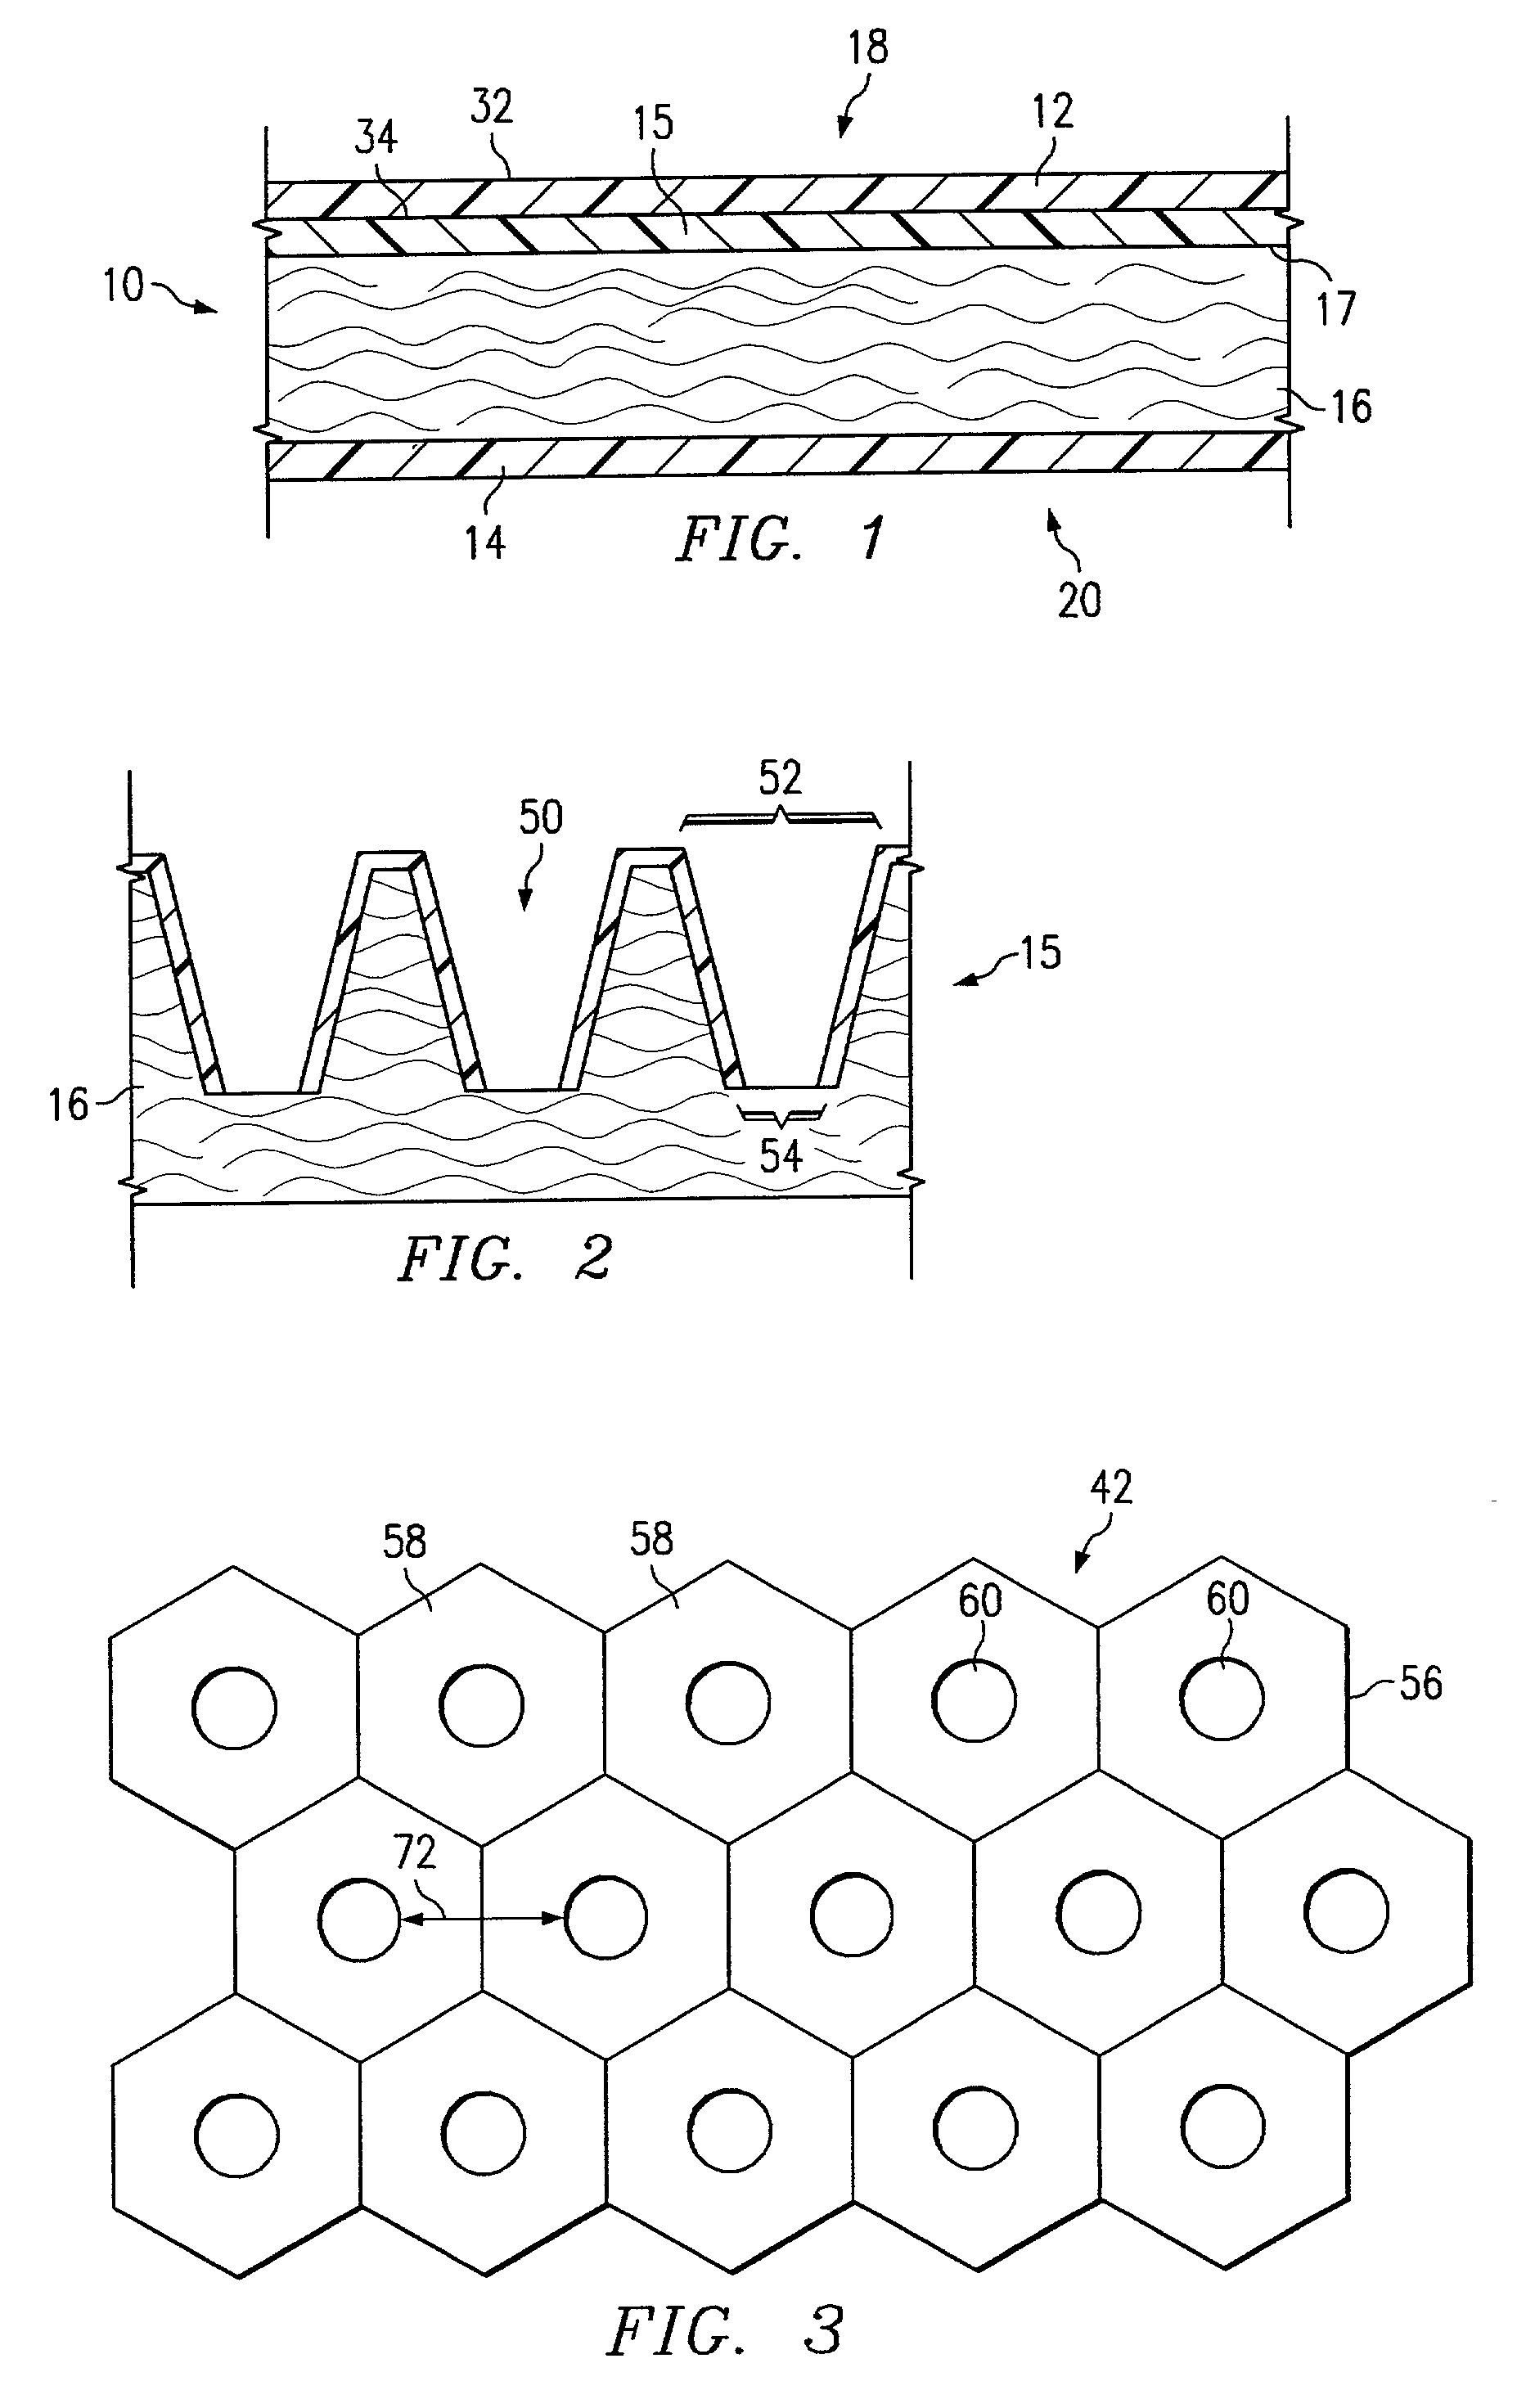 Absorbent article having a surface energy gradient between the topsheet and the acquisition distribution layer